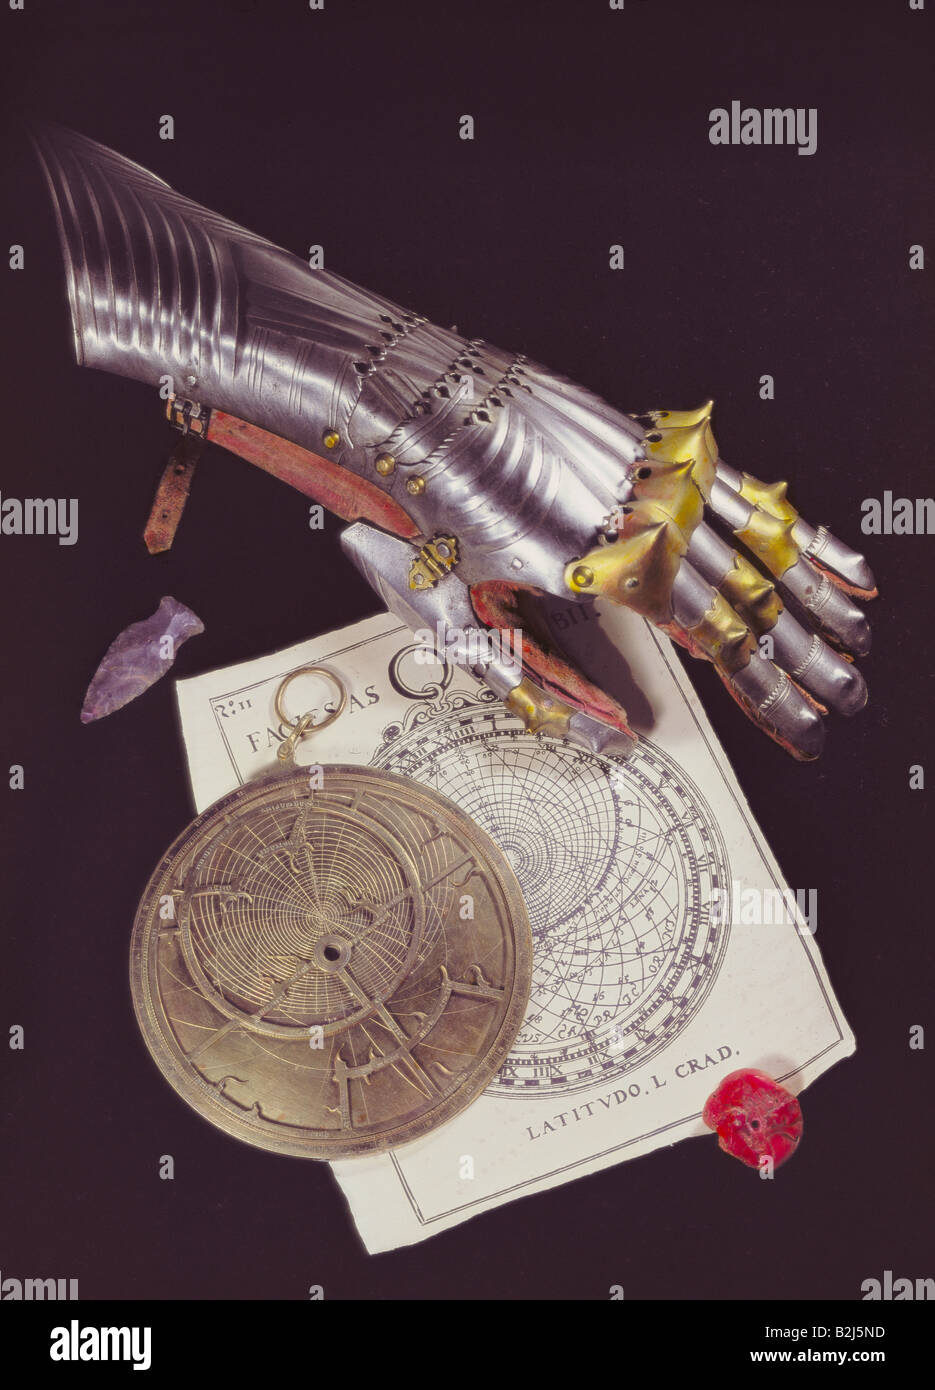 astronomy, measuring instruments, astrolabe with instructions, Nuremberg, circa 1500, glove of as knight's armour, South Germany, circa 1470, Bavarian NationalMuseum, Munich, knights, science, Bavaria, Germany, 15th/16th century, historic, historical, middle ages, Stock Photo